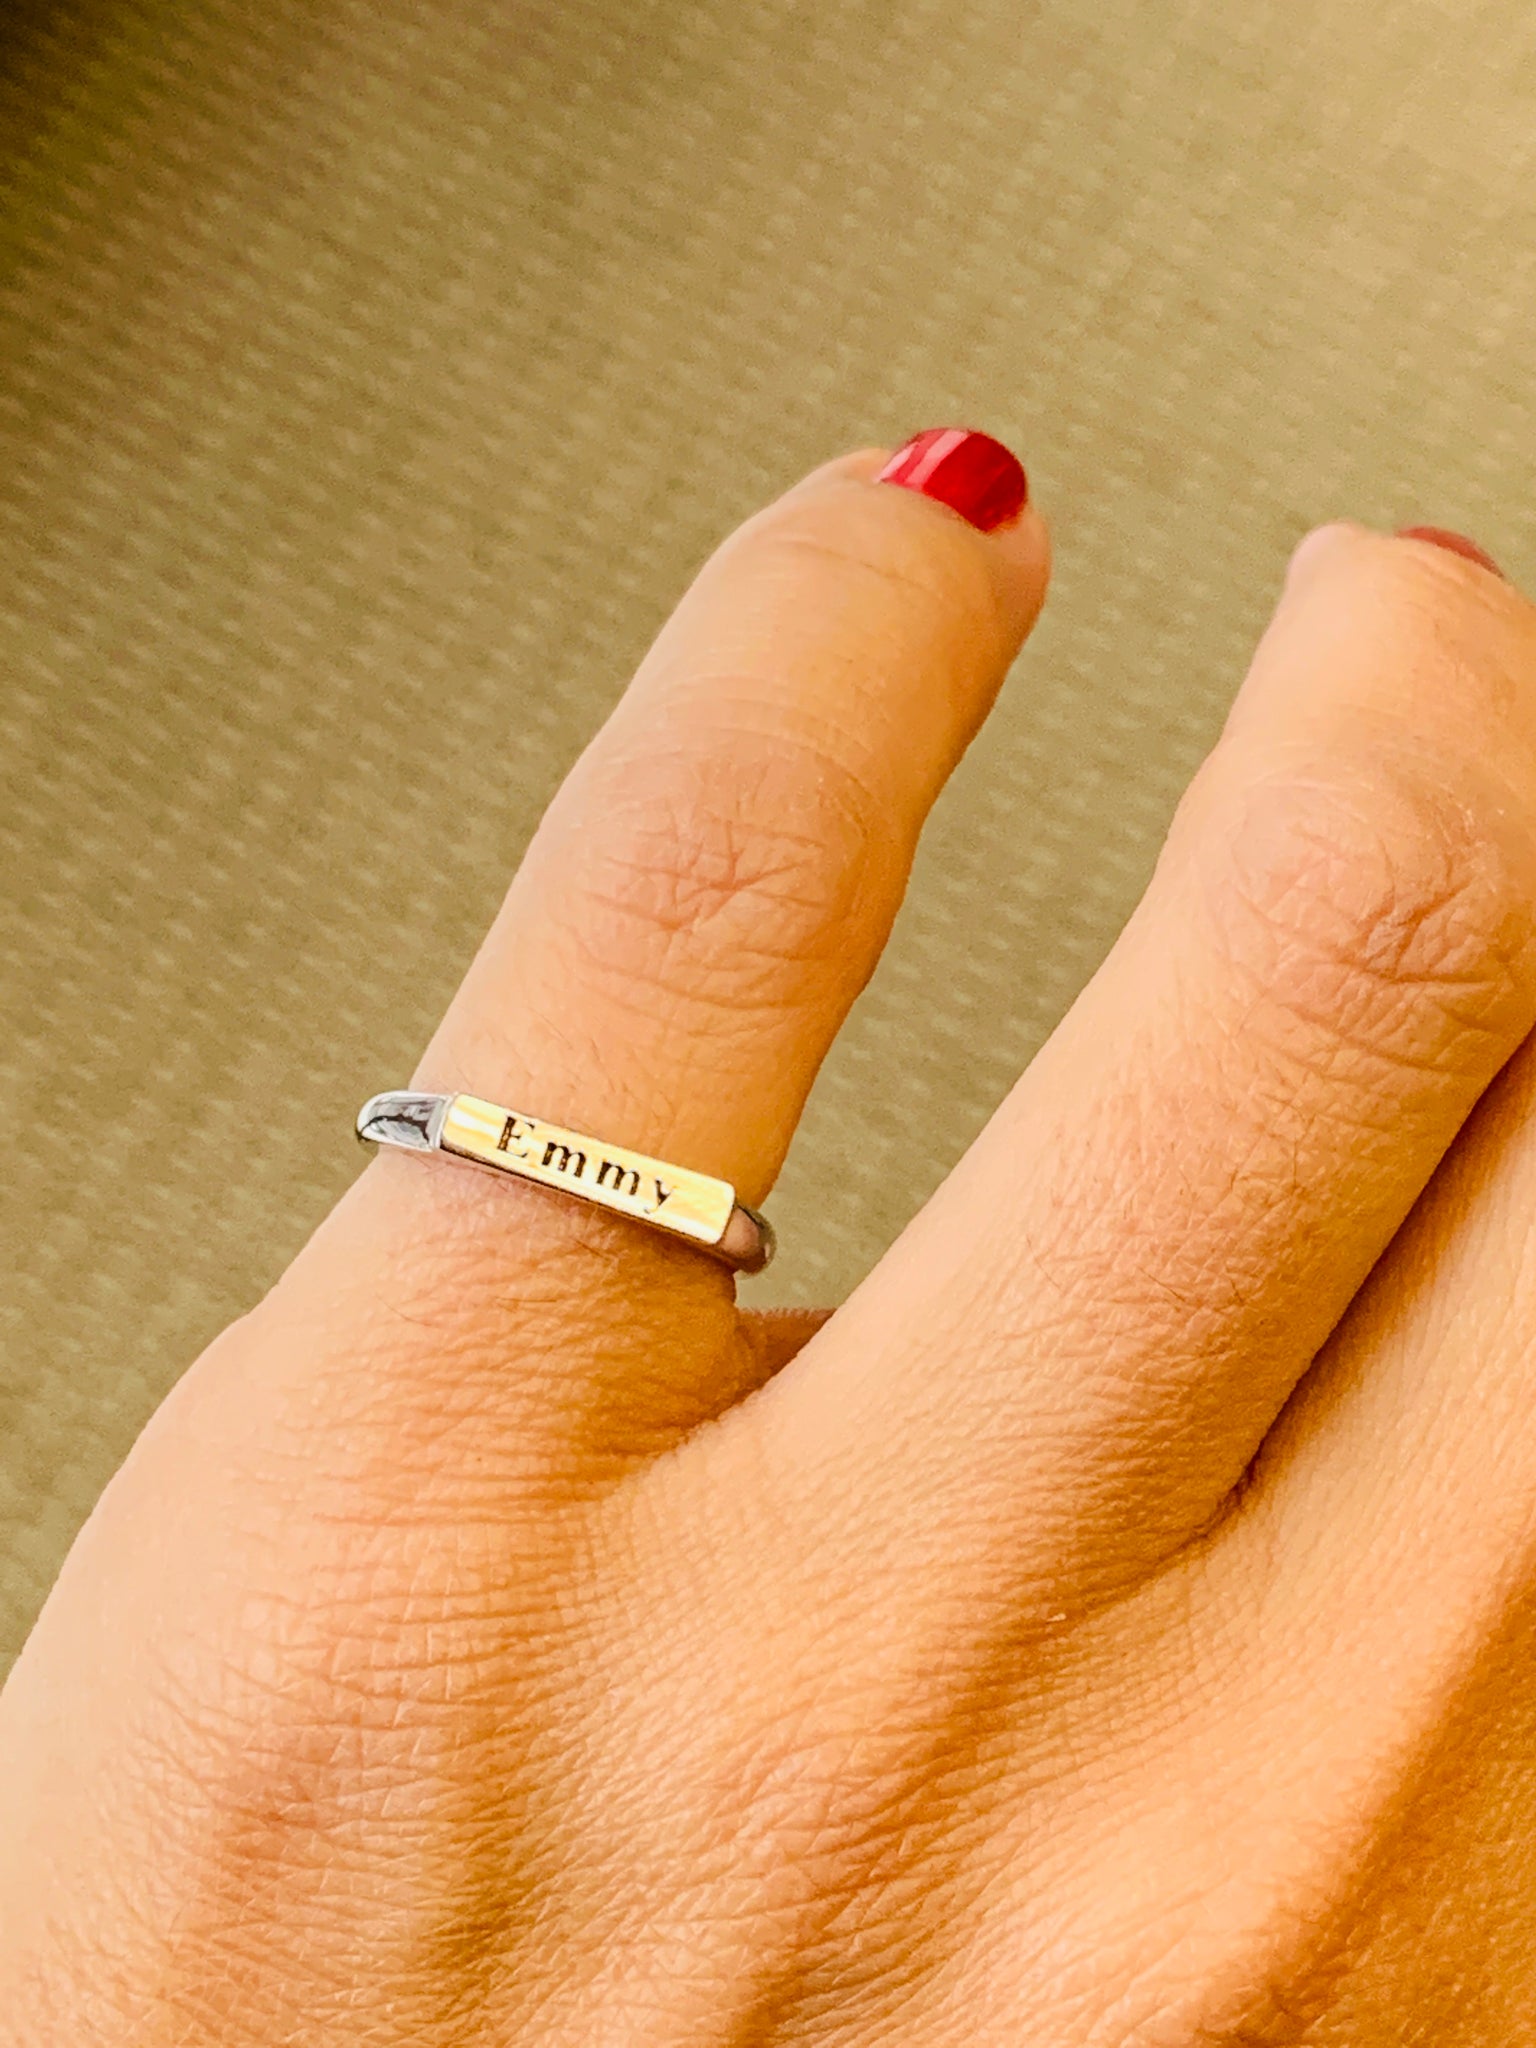 Personalized Gold Bar Ring